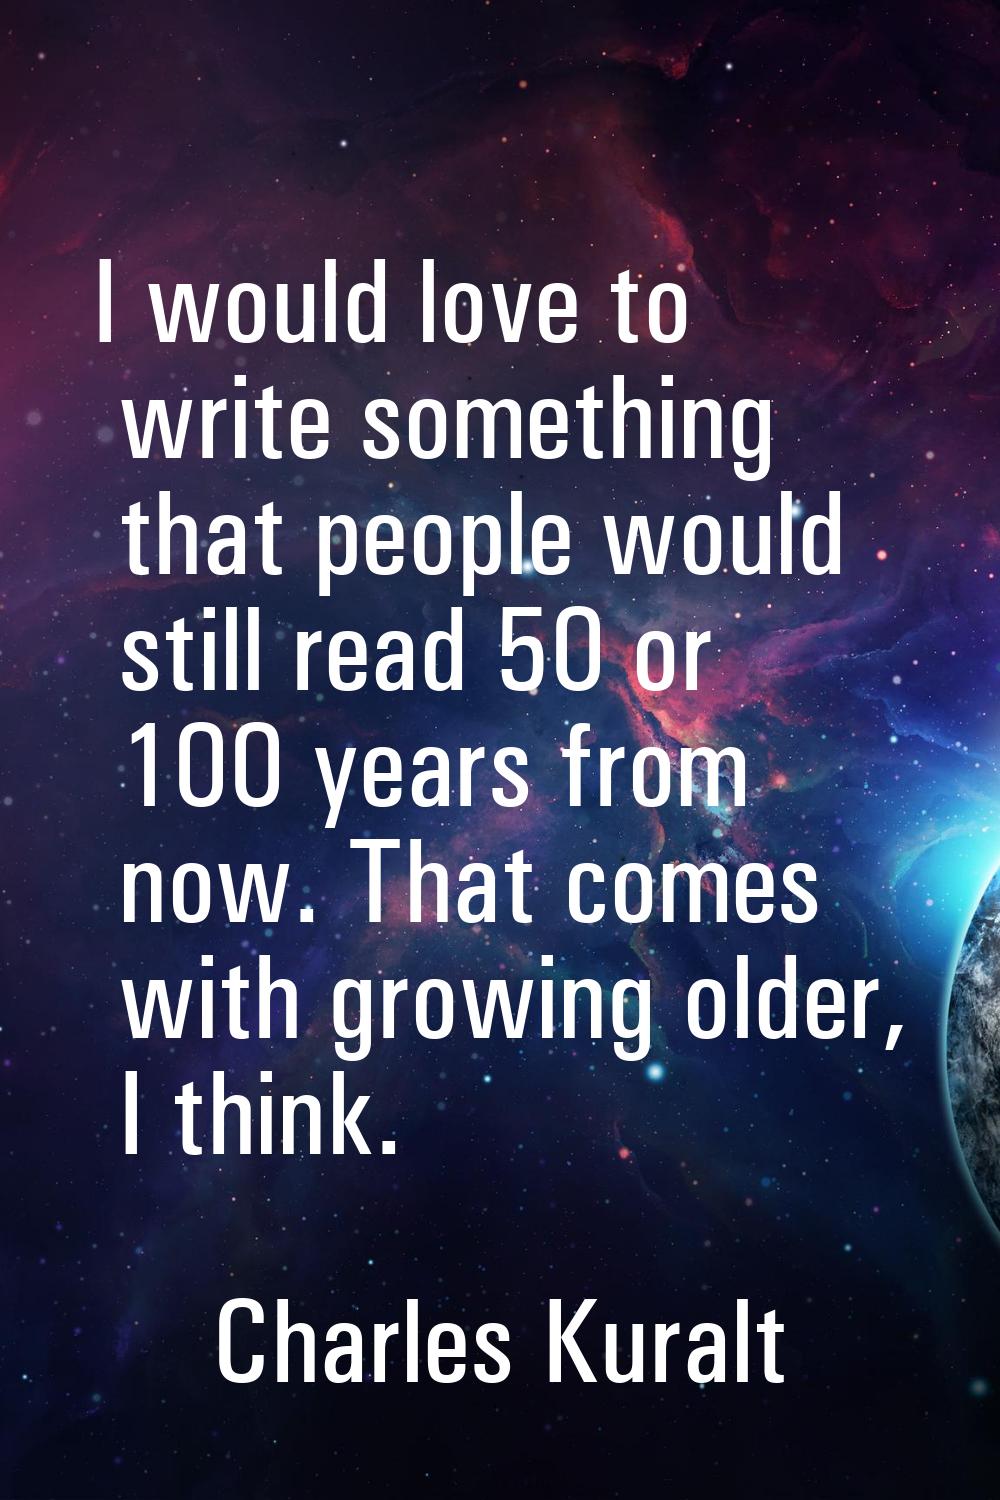 I would love to write something that people would still read 50 or 100 years from now. That comes w